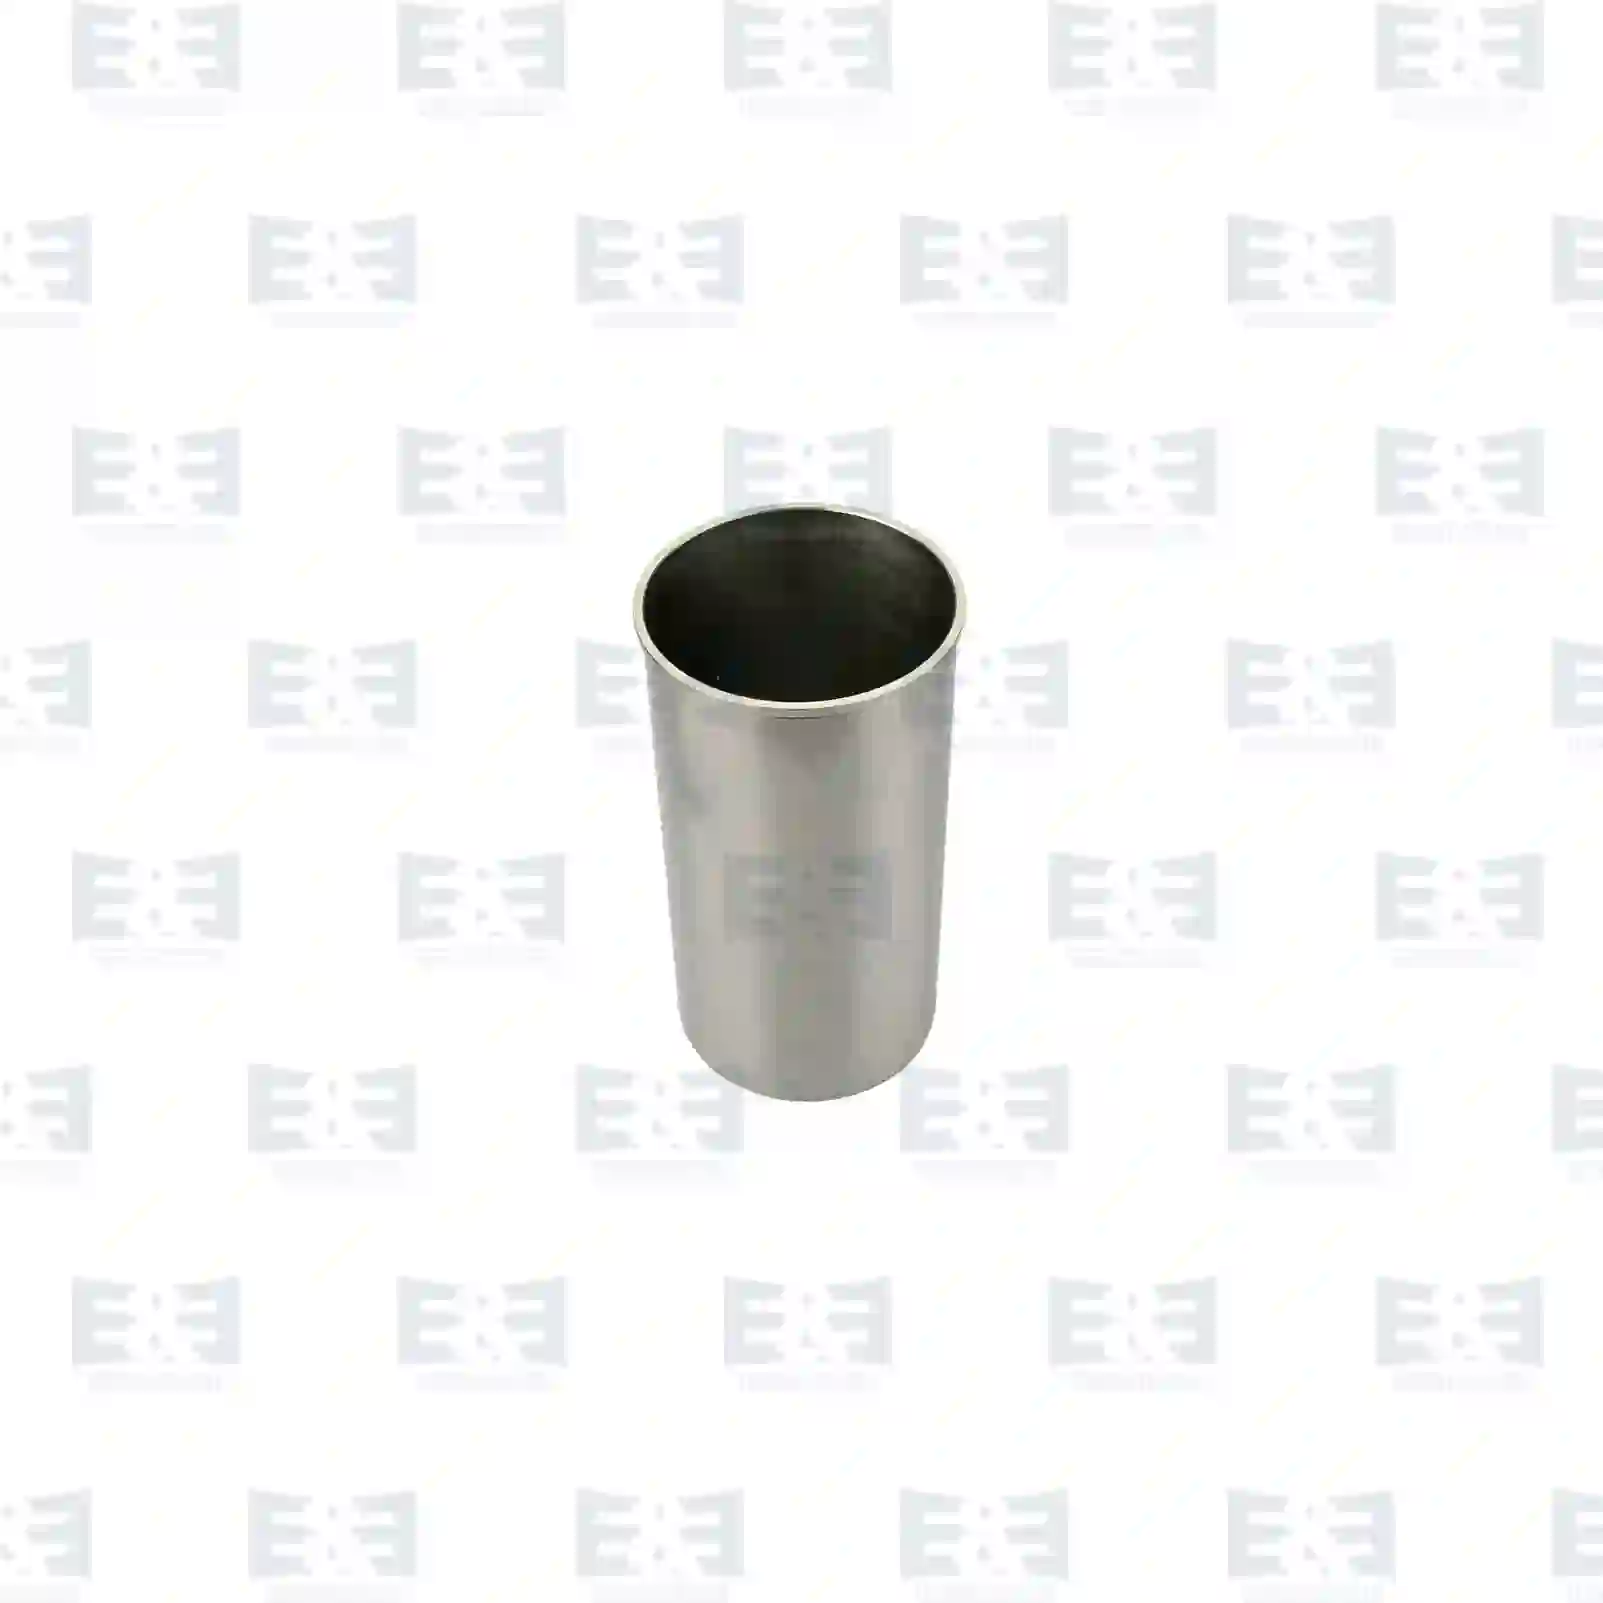 Cylinder liner, without seal rings, 2E2209011, 51012010318, 51012010378, 51012010386 ||  2E2209011 E&E Truck Spare Parts | Truck Spare Parts, Auotomotive Spare Parts Cylinder liner, without seal rings, 2E2209011, 51012010318, 51012010378, 51012010386 ||  2E2209011 E&E Truck Spare Parts | Truck Spare Parts, Auotomotive Spare Parts